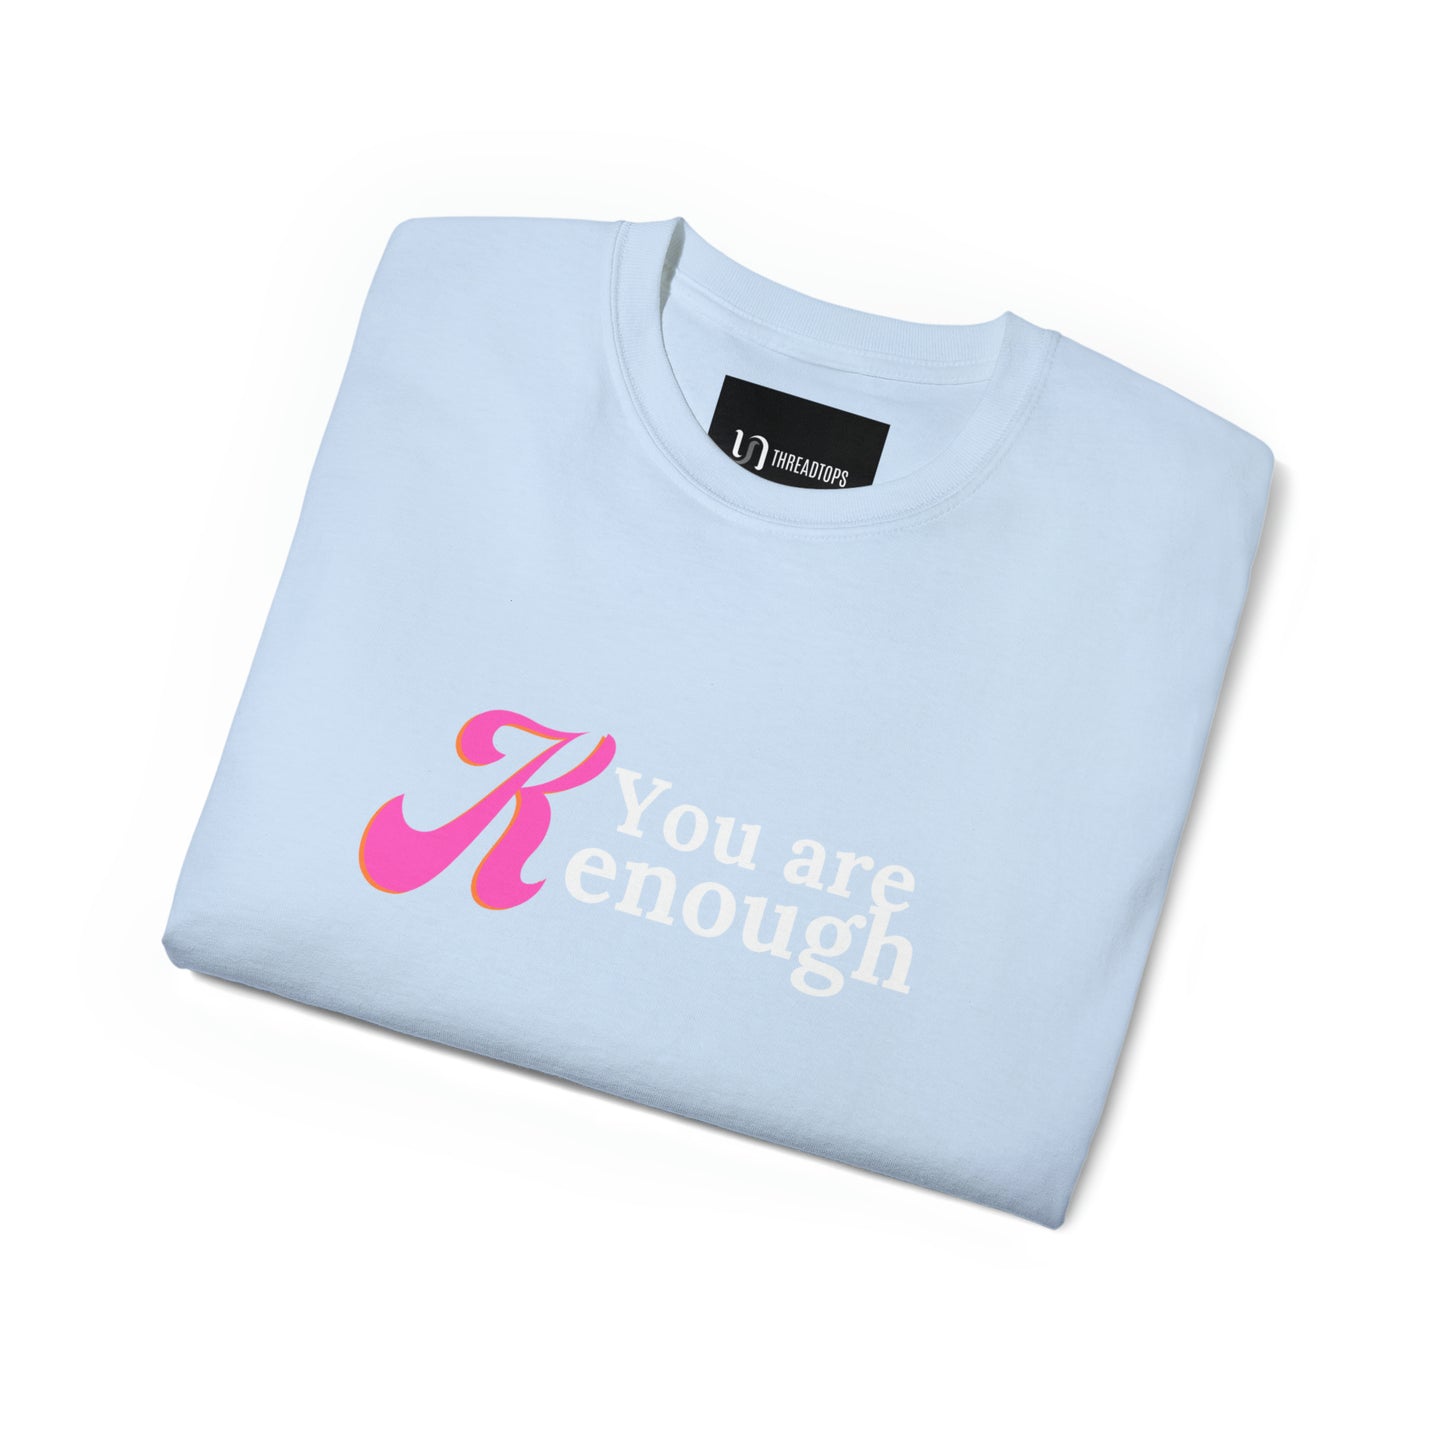 You are Kenough | Tee | Barbie Edition